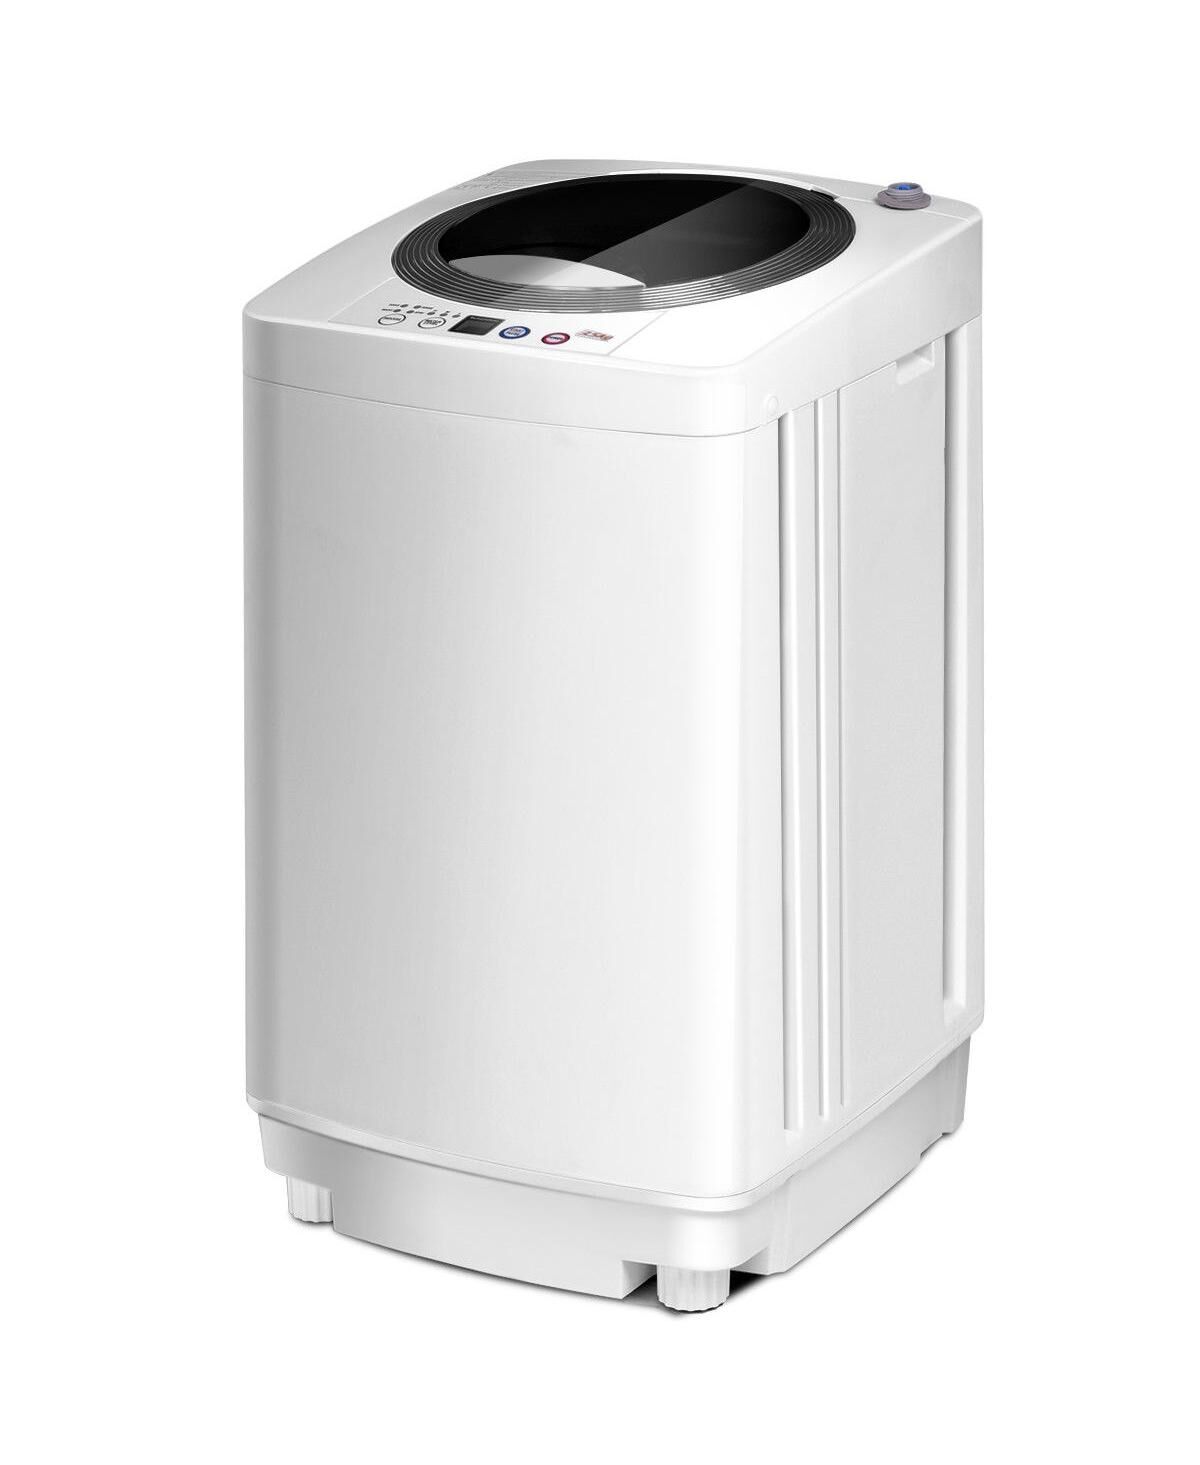 Costway Full-Automatic Laundry Wash Machine Washer/Spinner W/Drain Pump - White